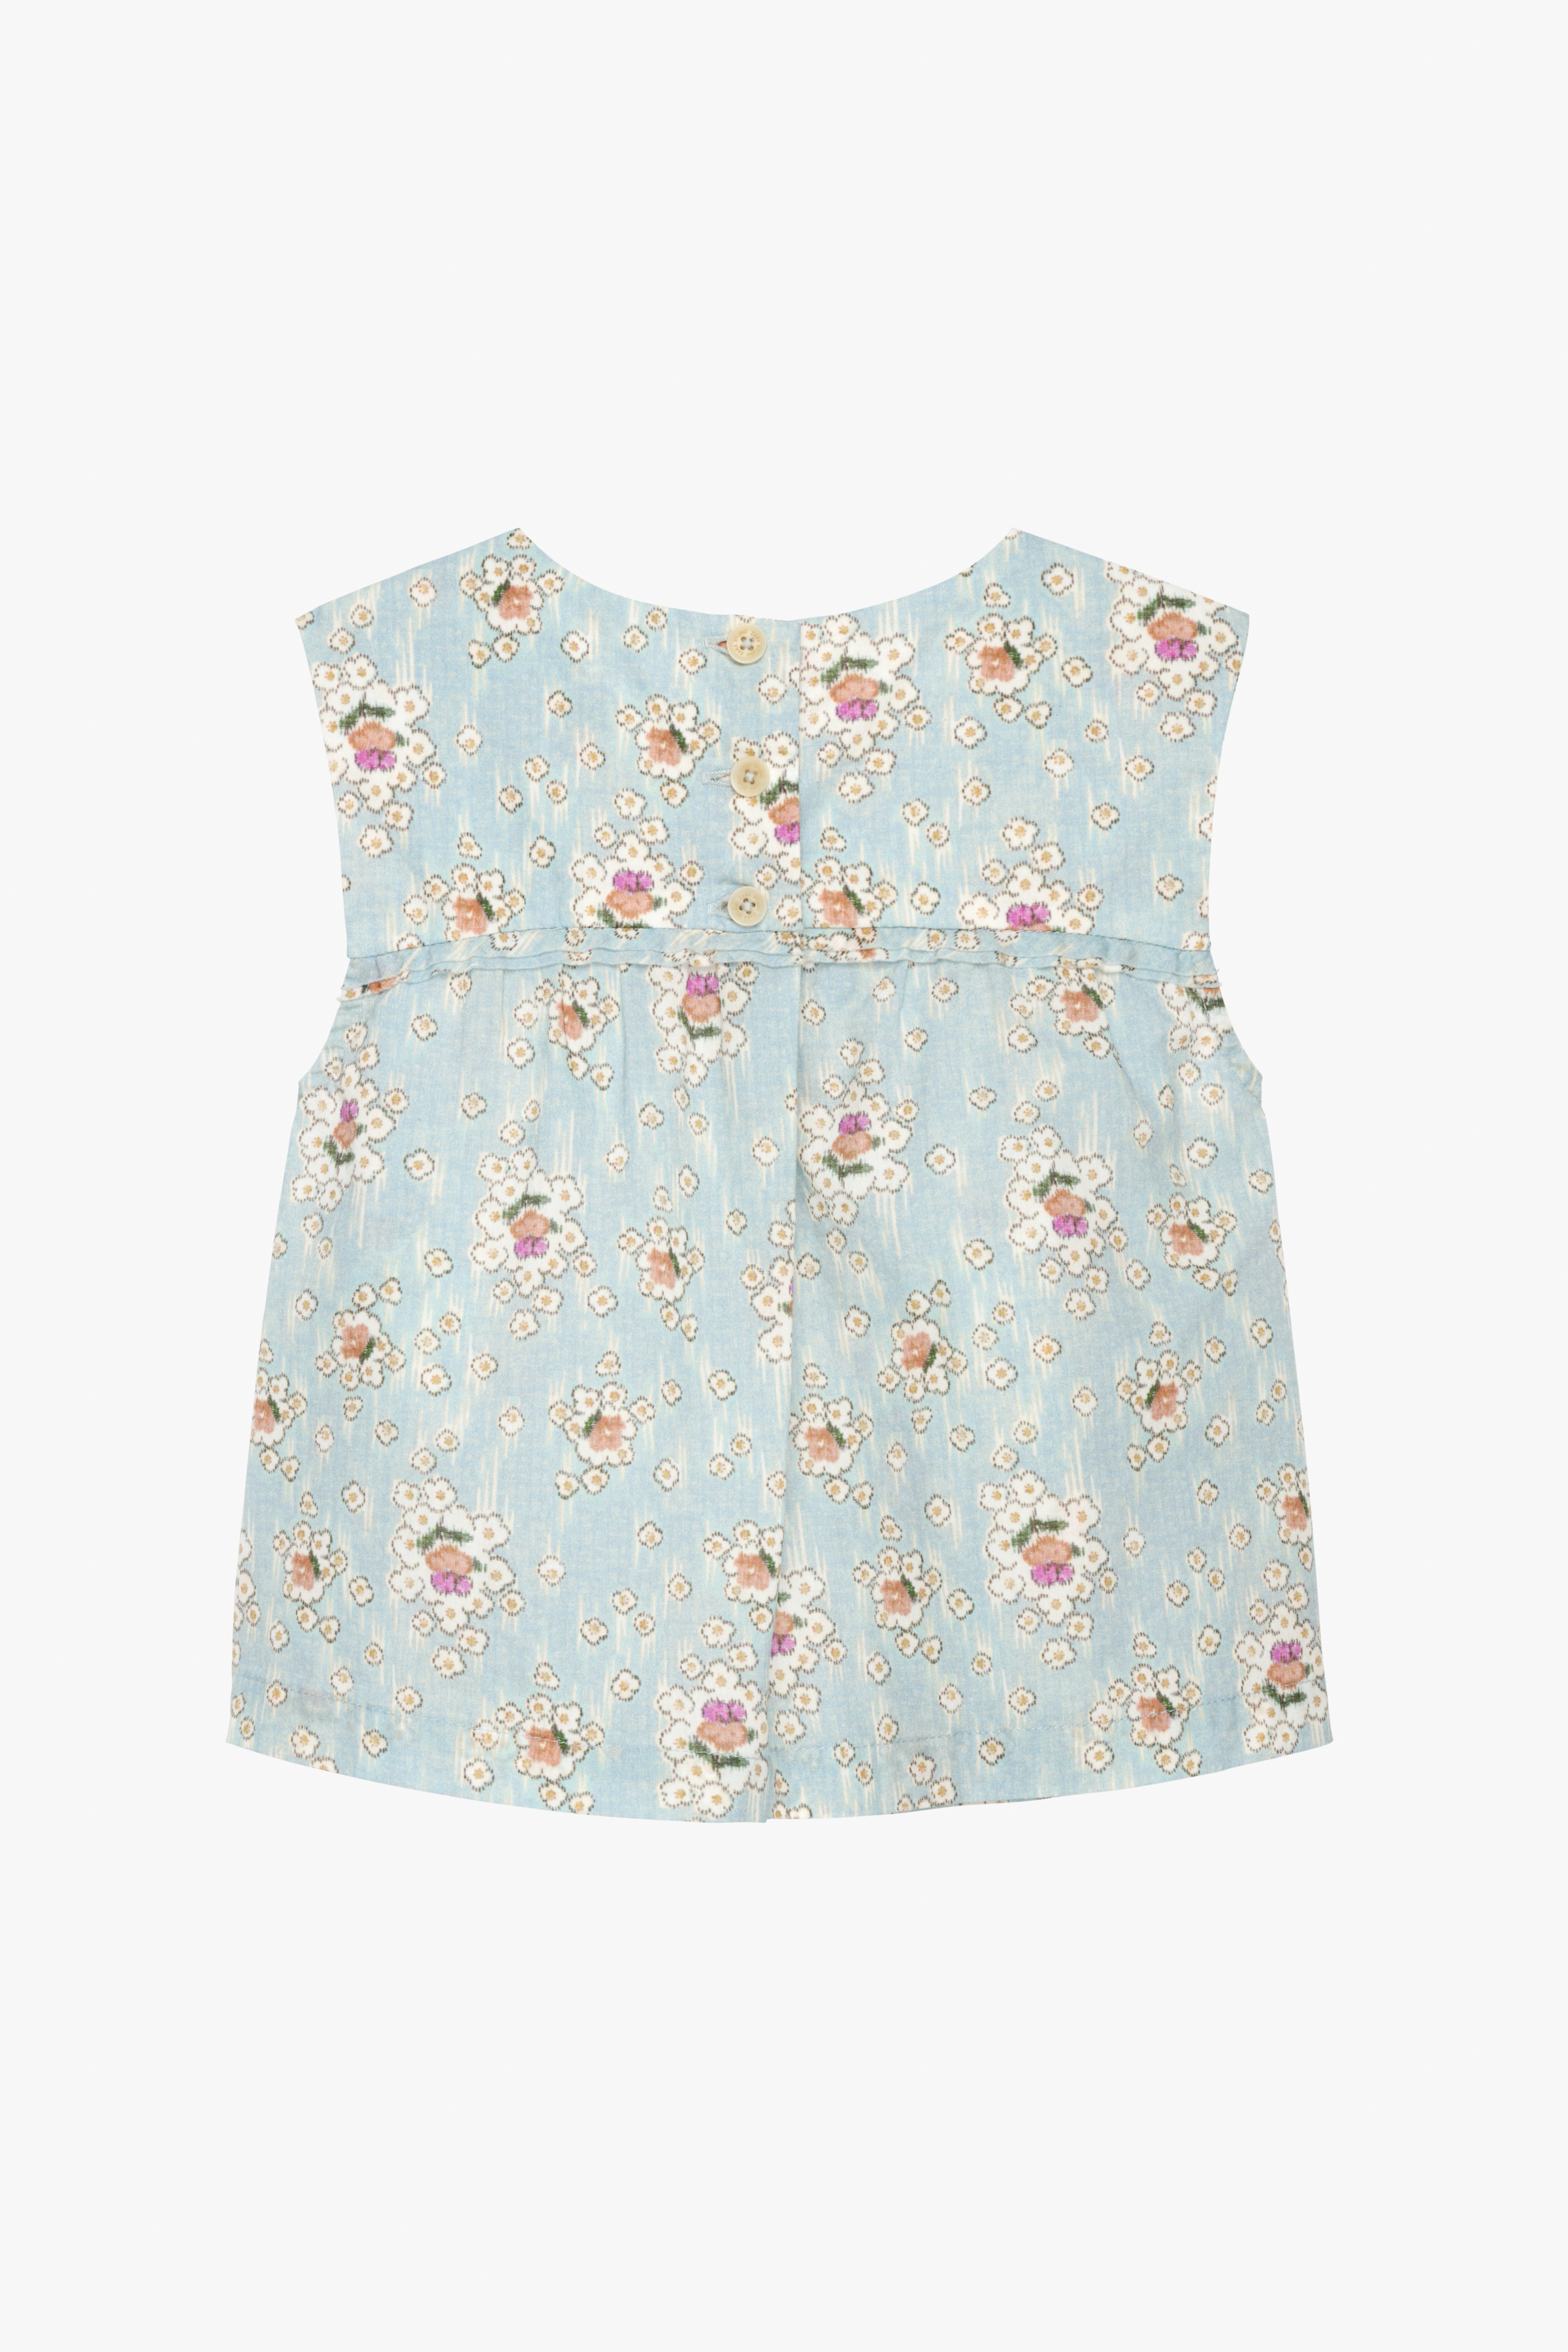 FLORAL PRINT TOP LIMITED EDITION